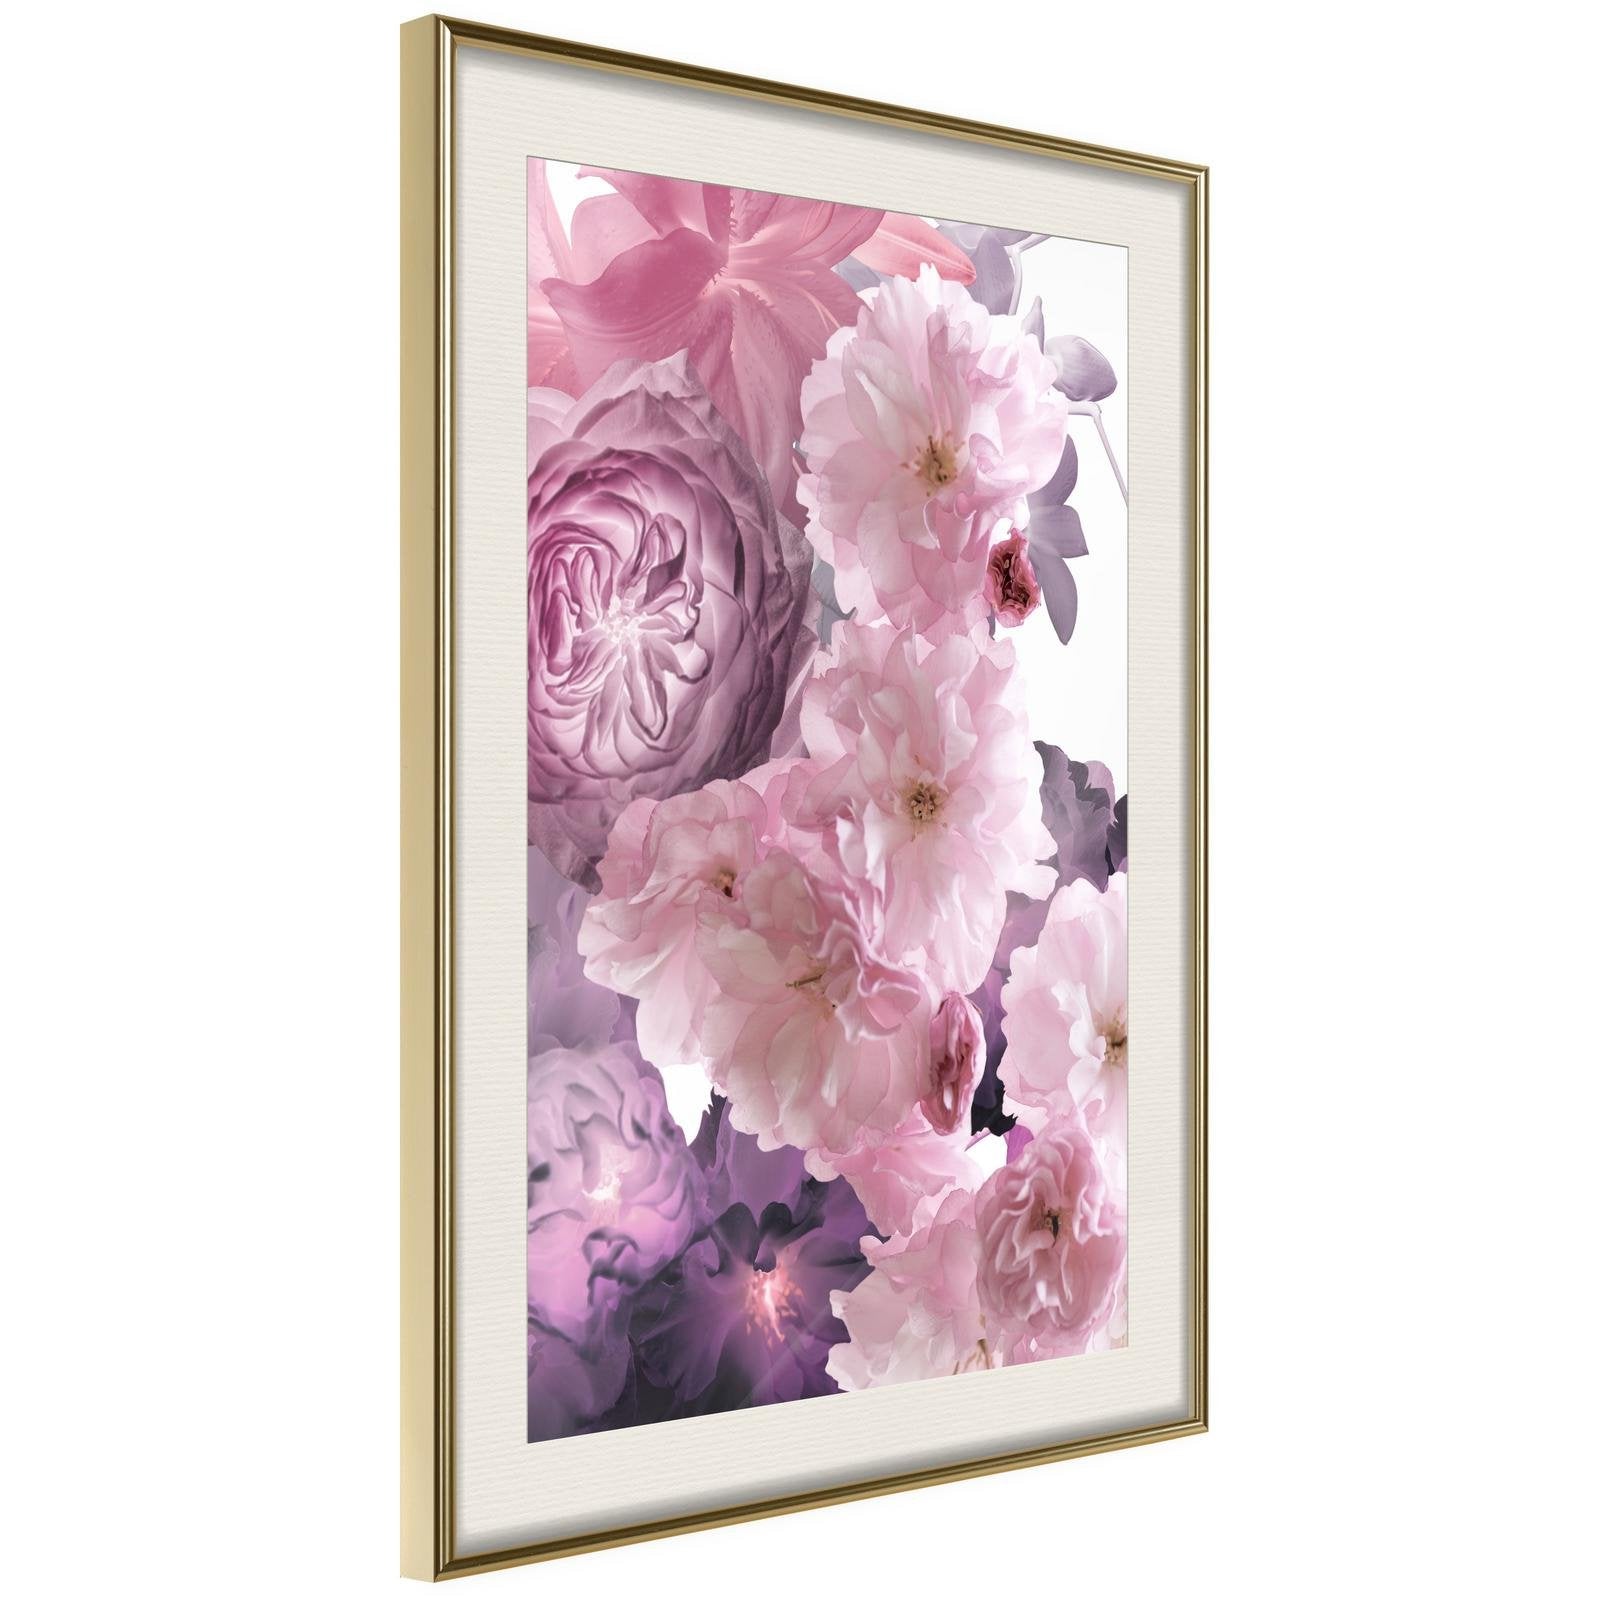 Inramad Poster / Tavla - Pink Bouquet-Poster Inramad-Artgeist-20x30-Guldram med passepartout-peaceofhome.se